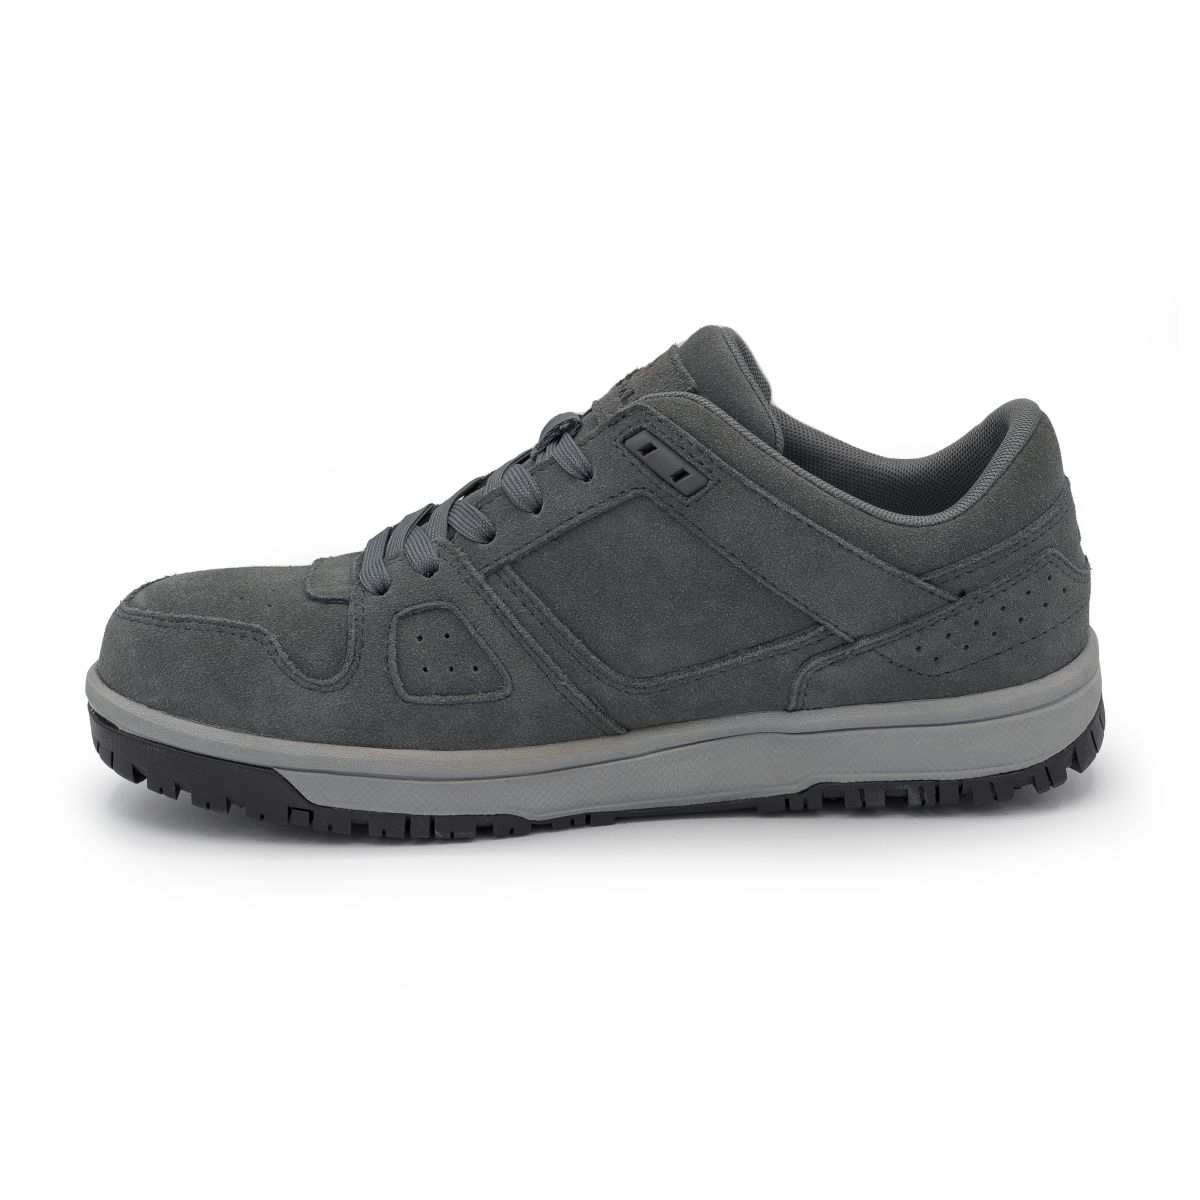 AIRWALK SAFETY Men's Mongo Composite Toe EH Work Shoe Charcoal/Grey - AW6301 CHARCOAL/GRAY - CHARCOAL/GRAY, 7-W